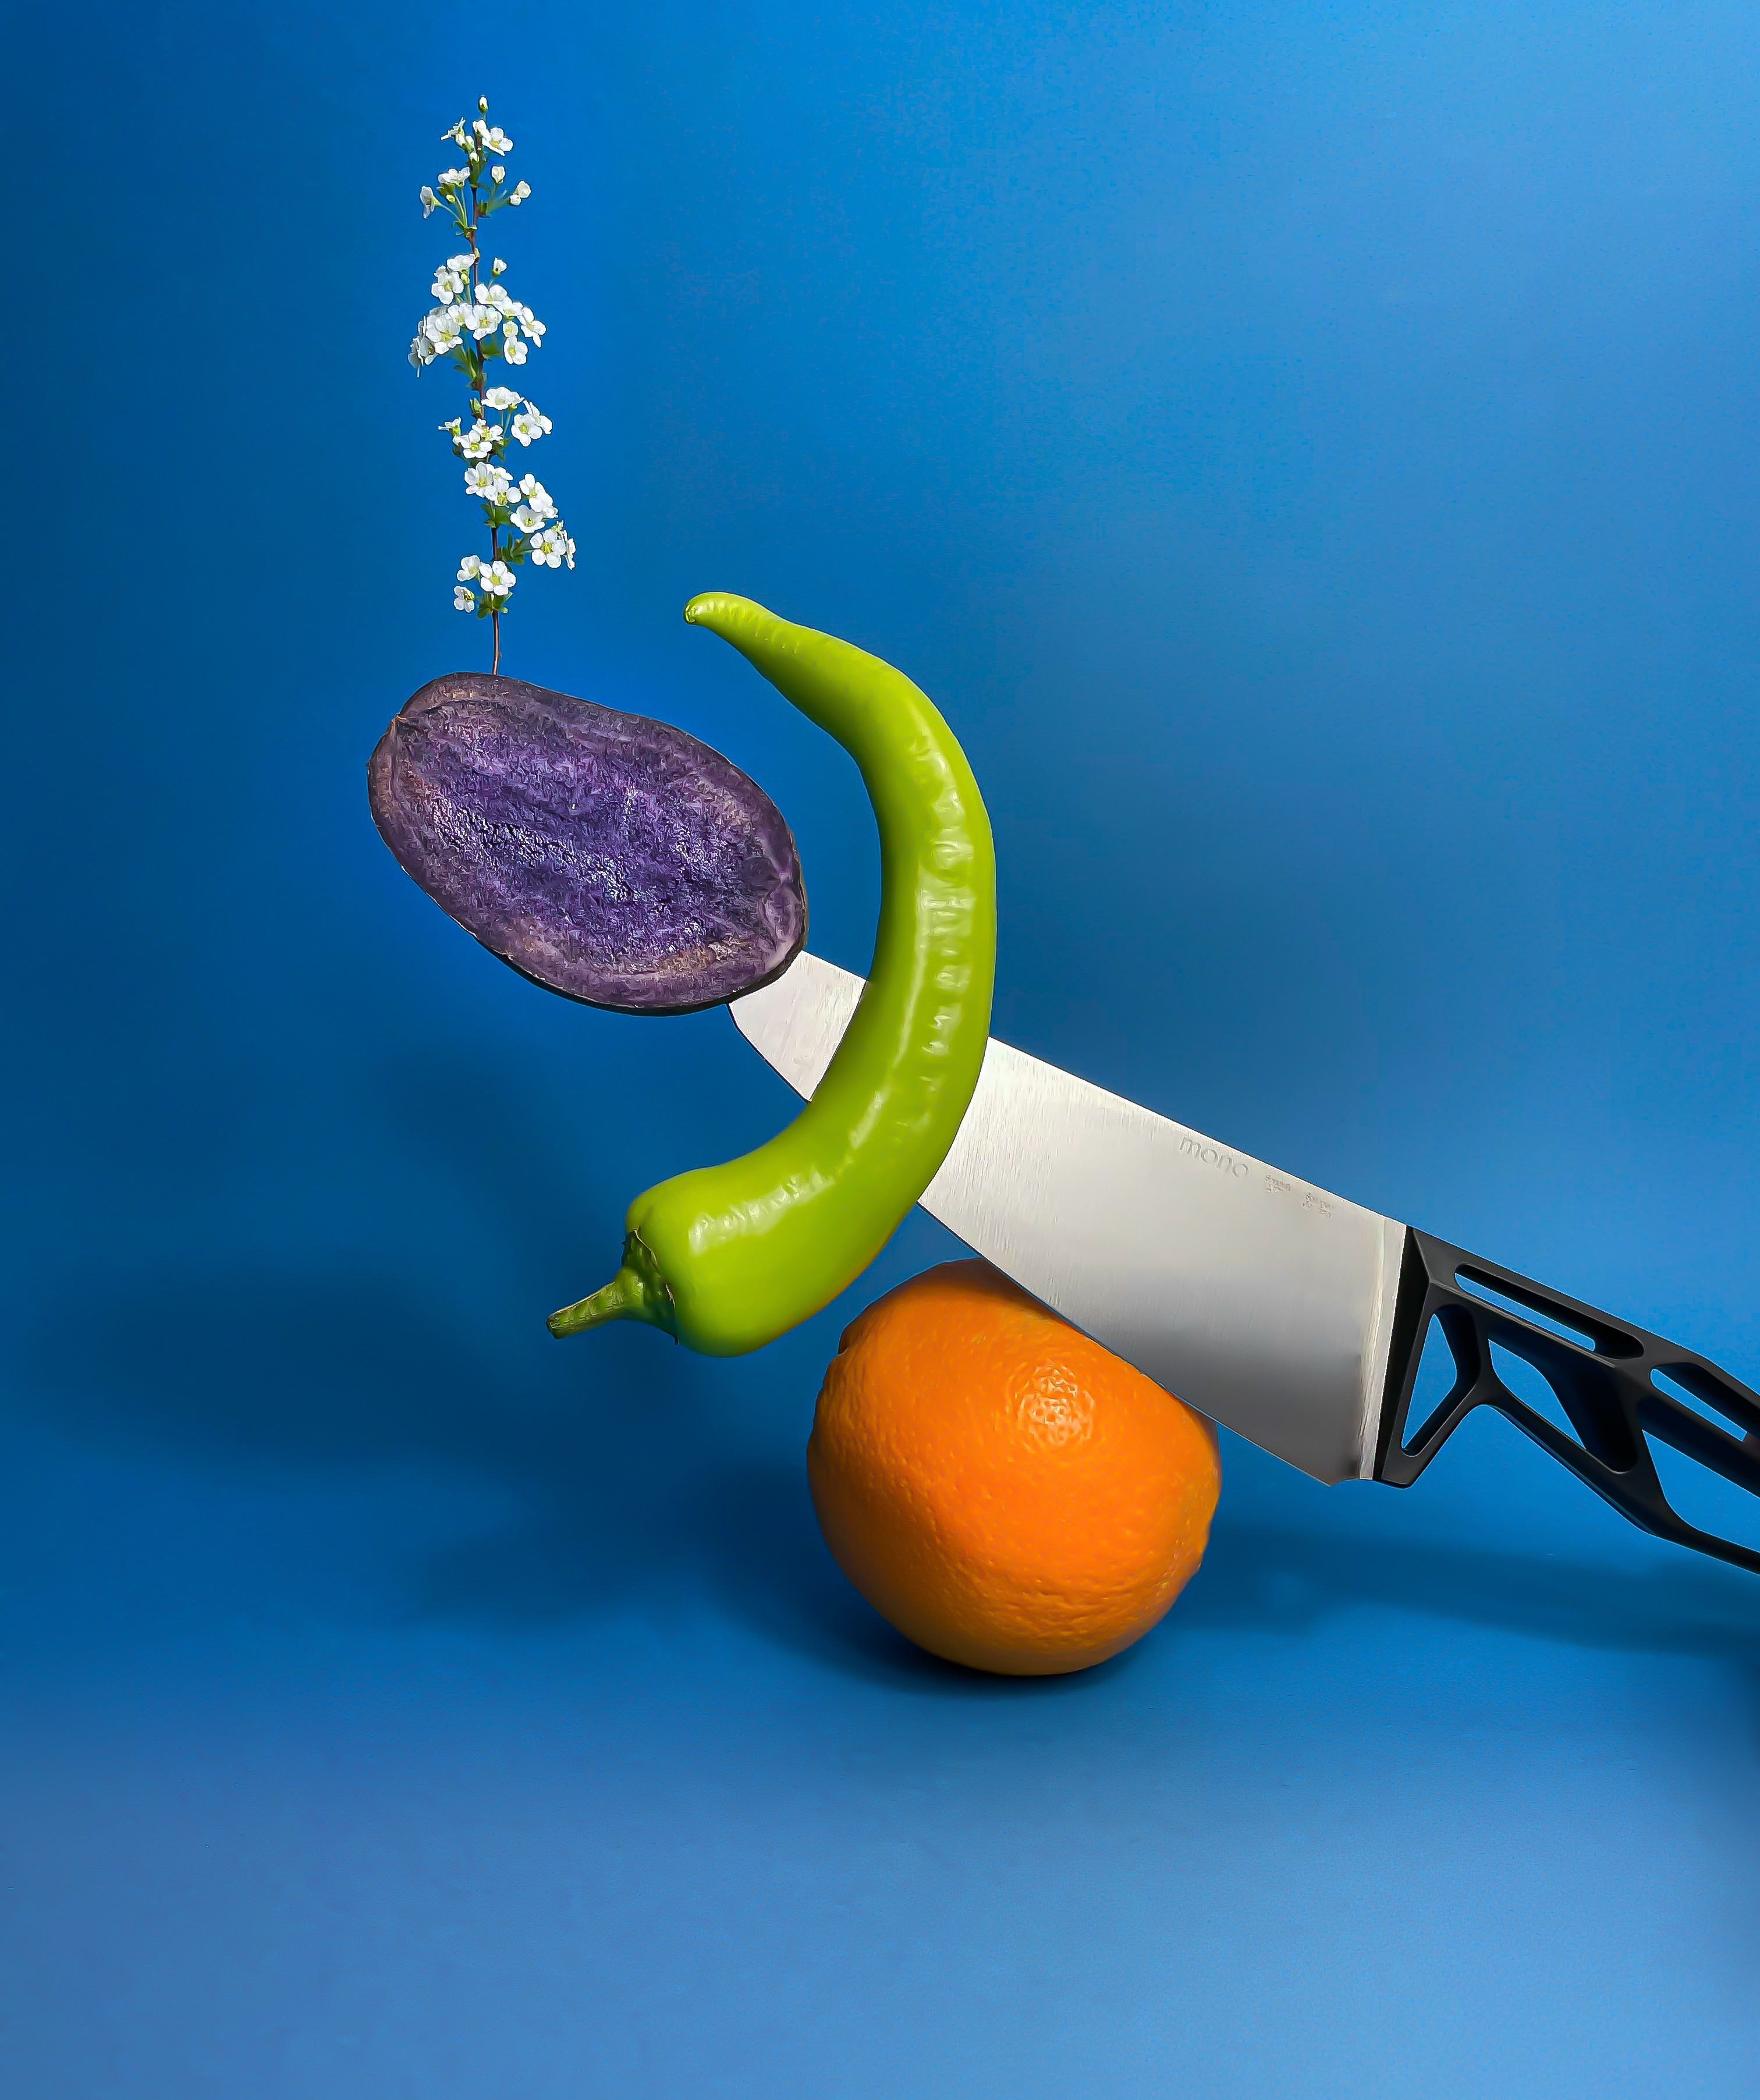 Knife impaling a blue potatoe, pepper and blossoms leaning on an orange